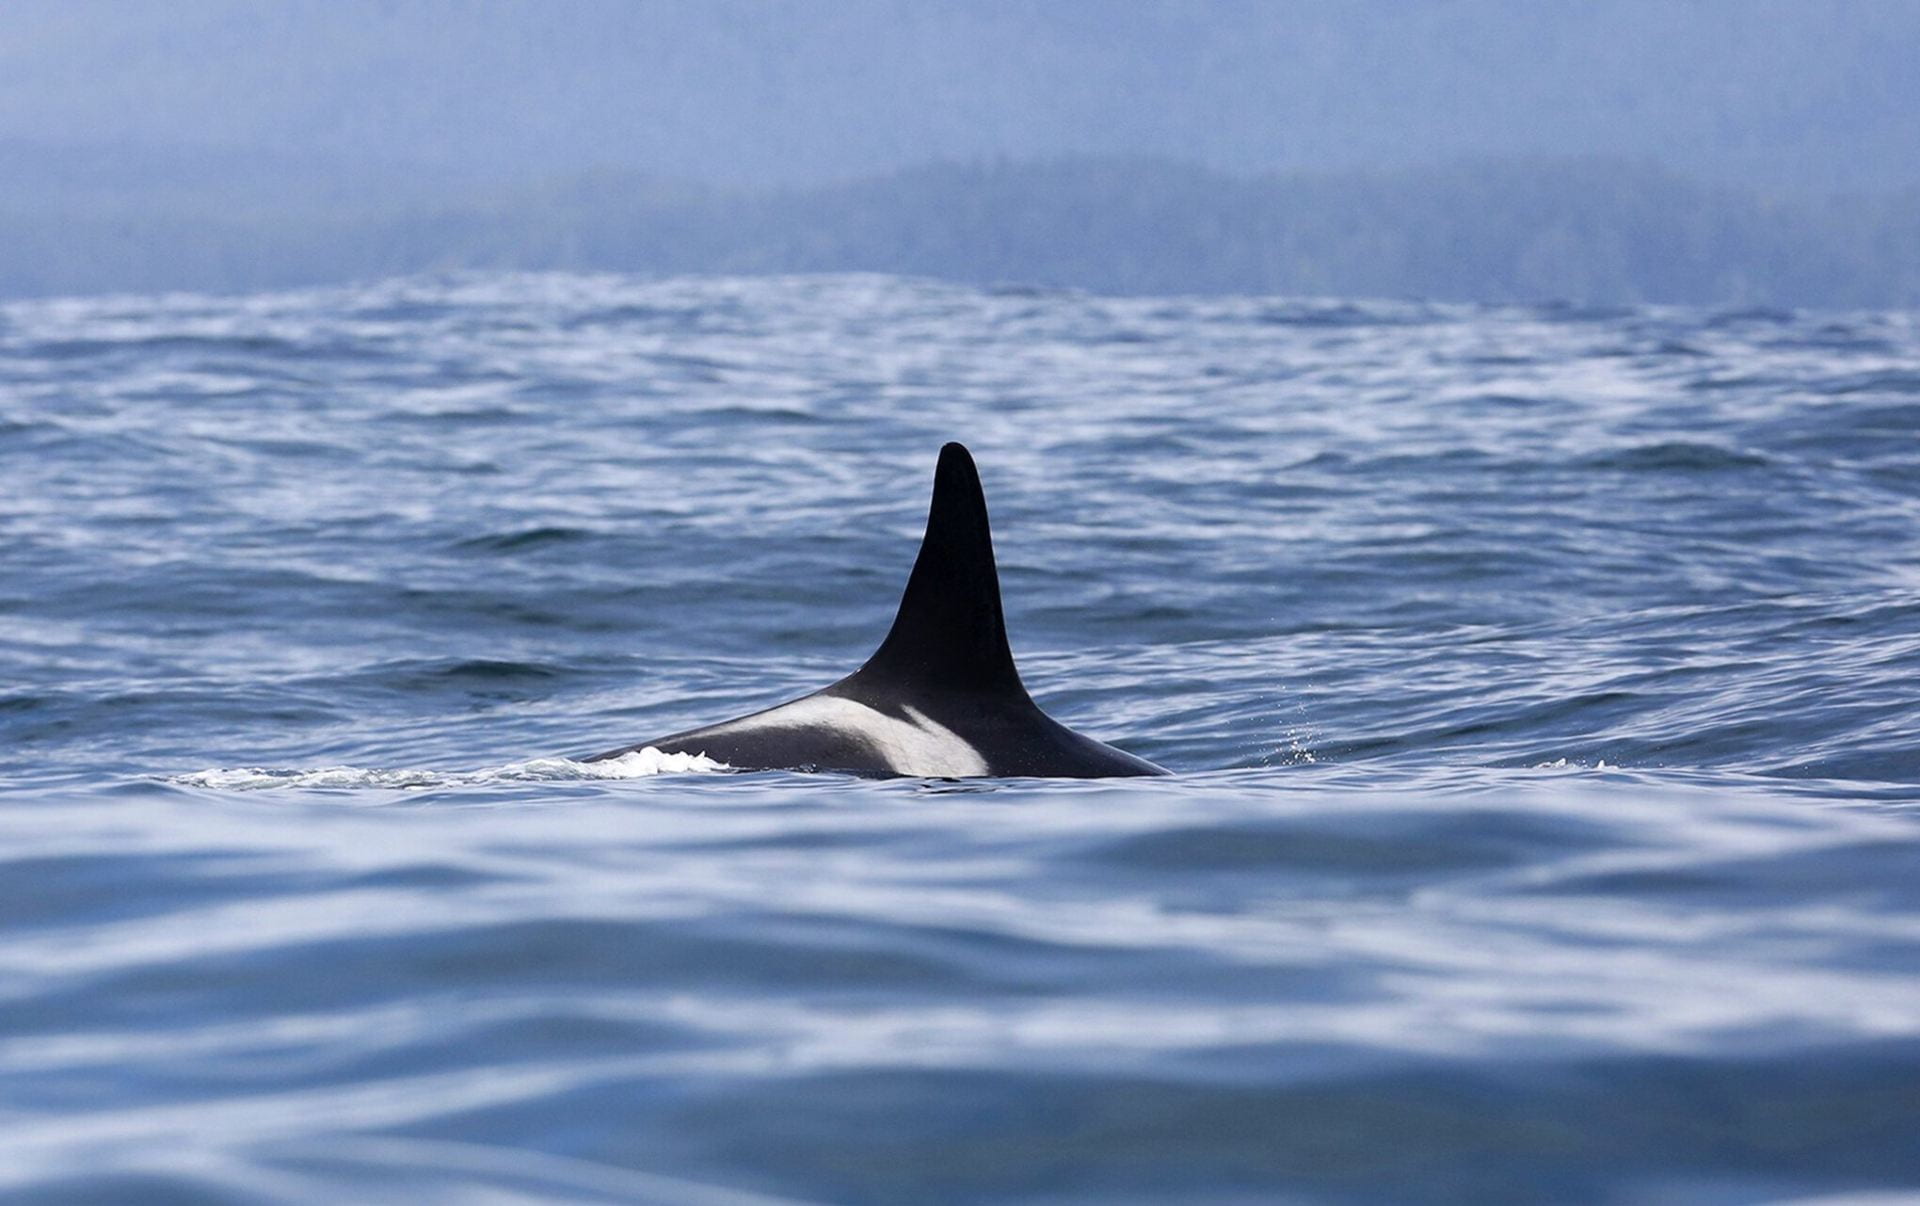 Record heat, drought threaten even the toughest survivors: L25, the oldest orca, and the winter Chinook she depends on